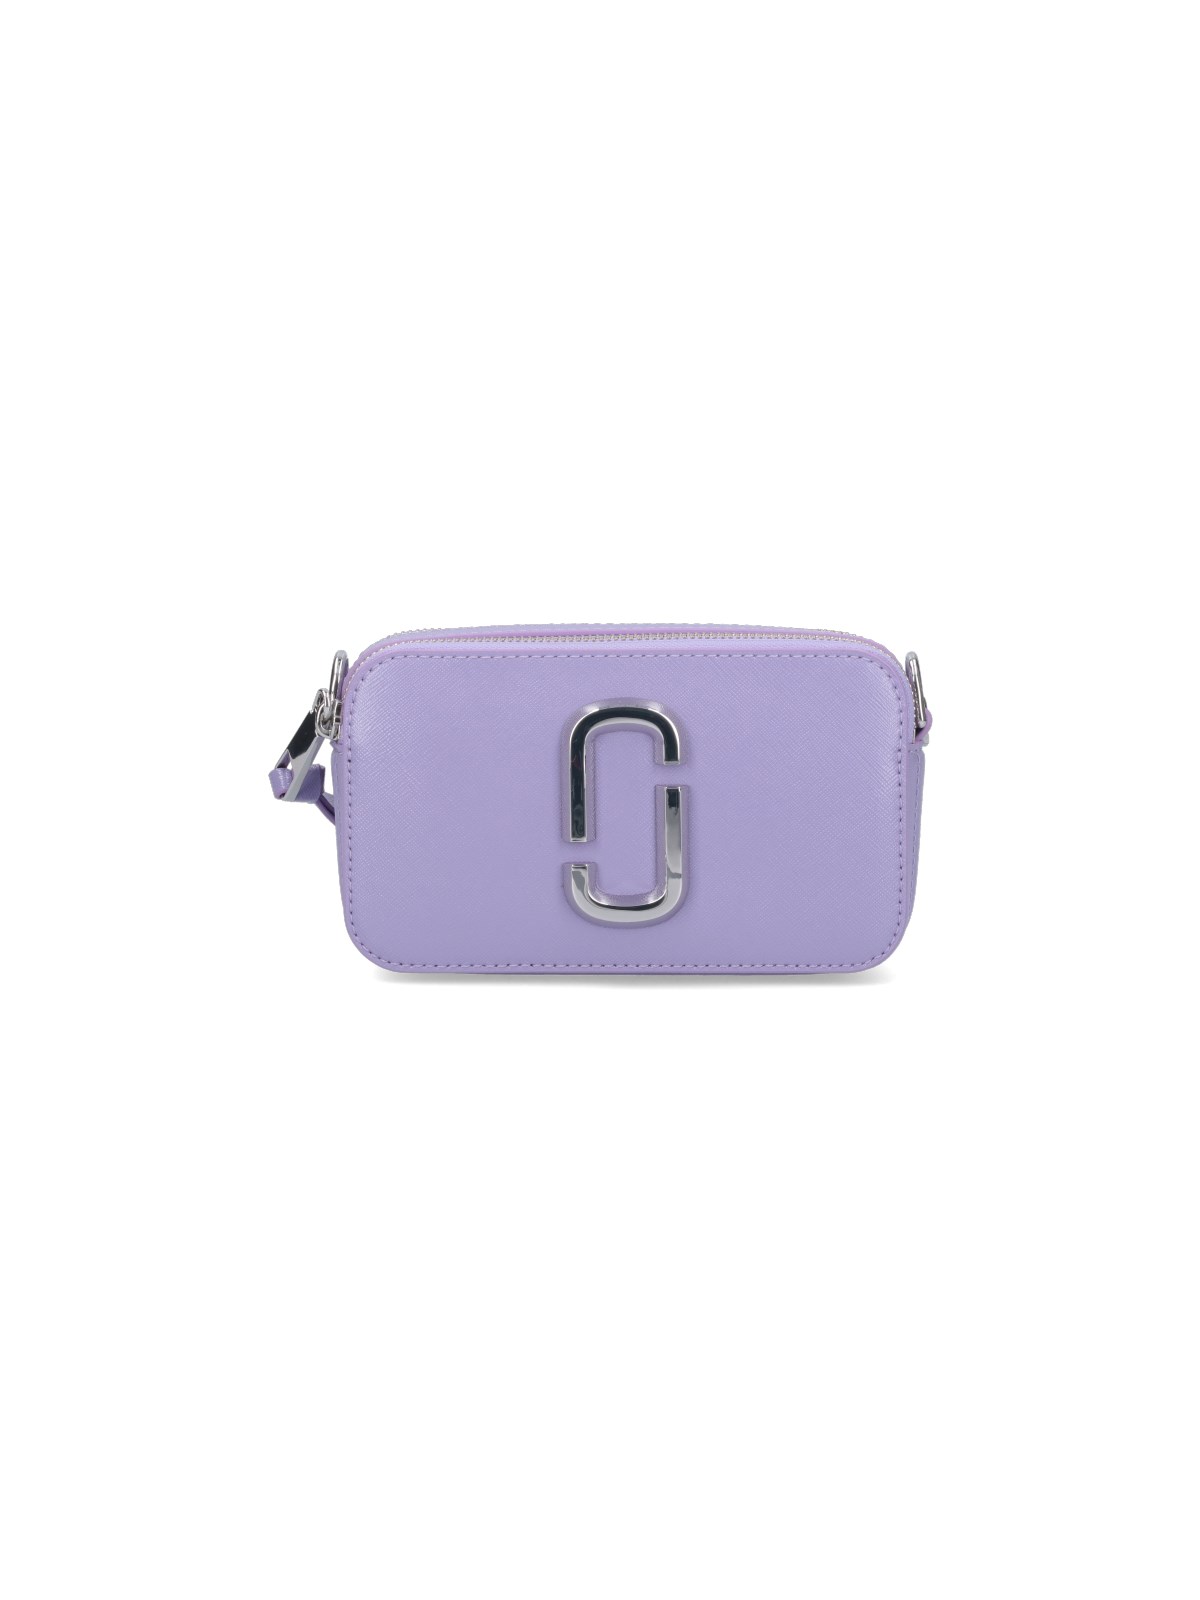 Snapshot leather crossbody bag Marc Jacobs Purple in Leather